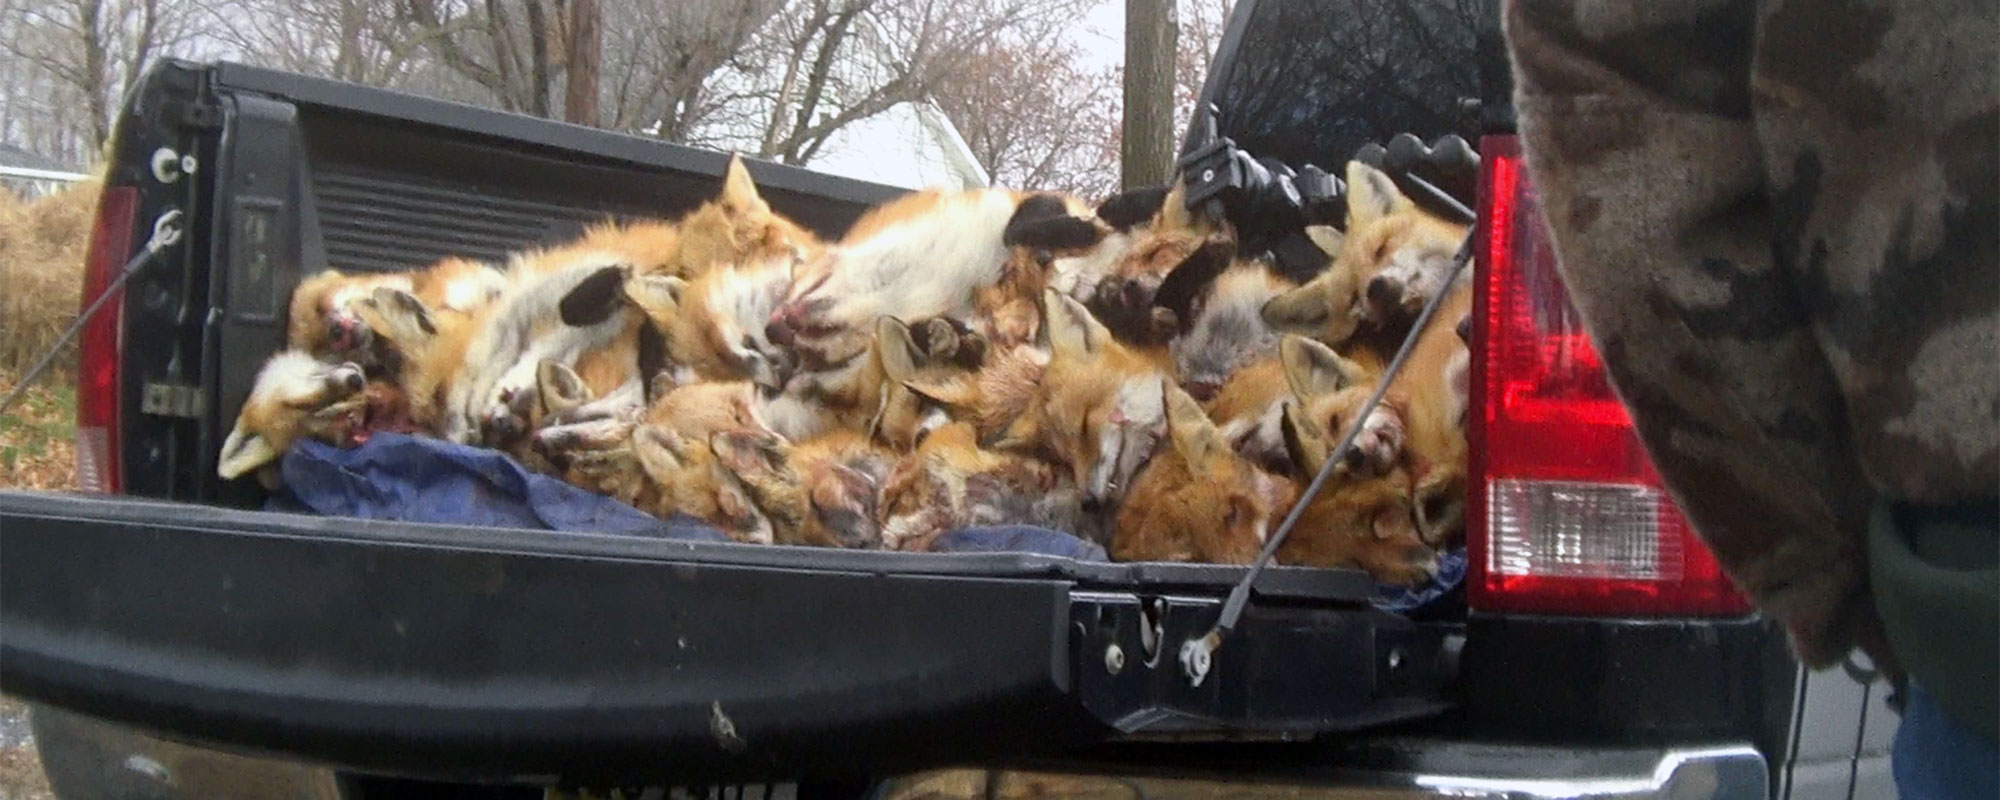 Aftermath of a wildlife killing contest.